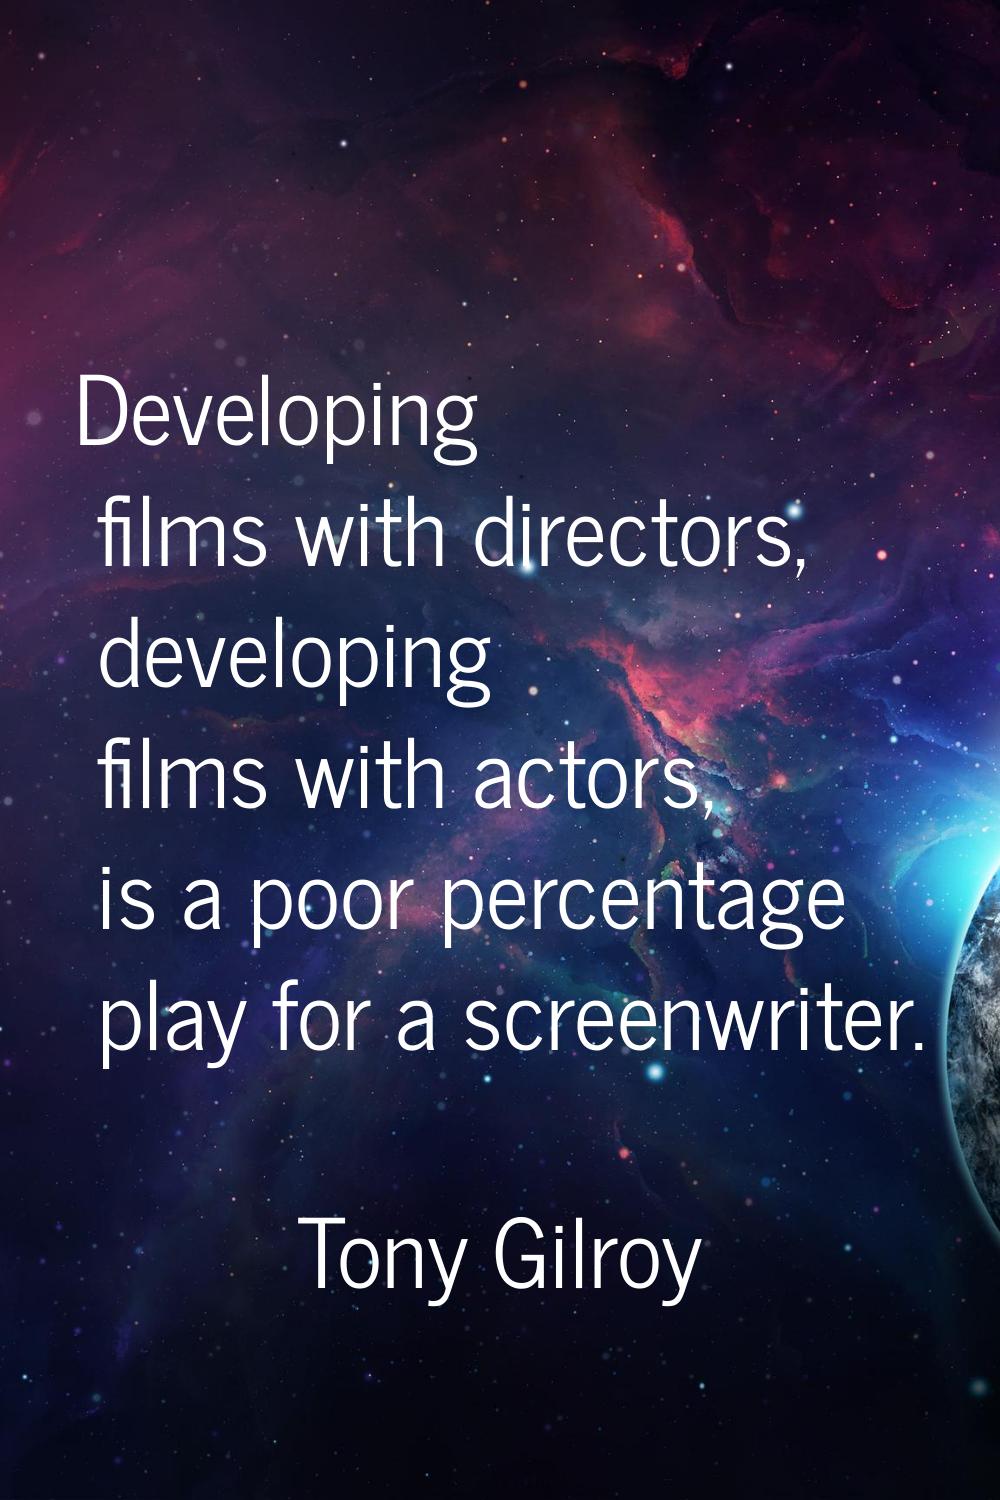 Developing films with directors, developing films with actors, is a poor percentage play for a scre